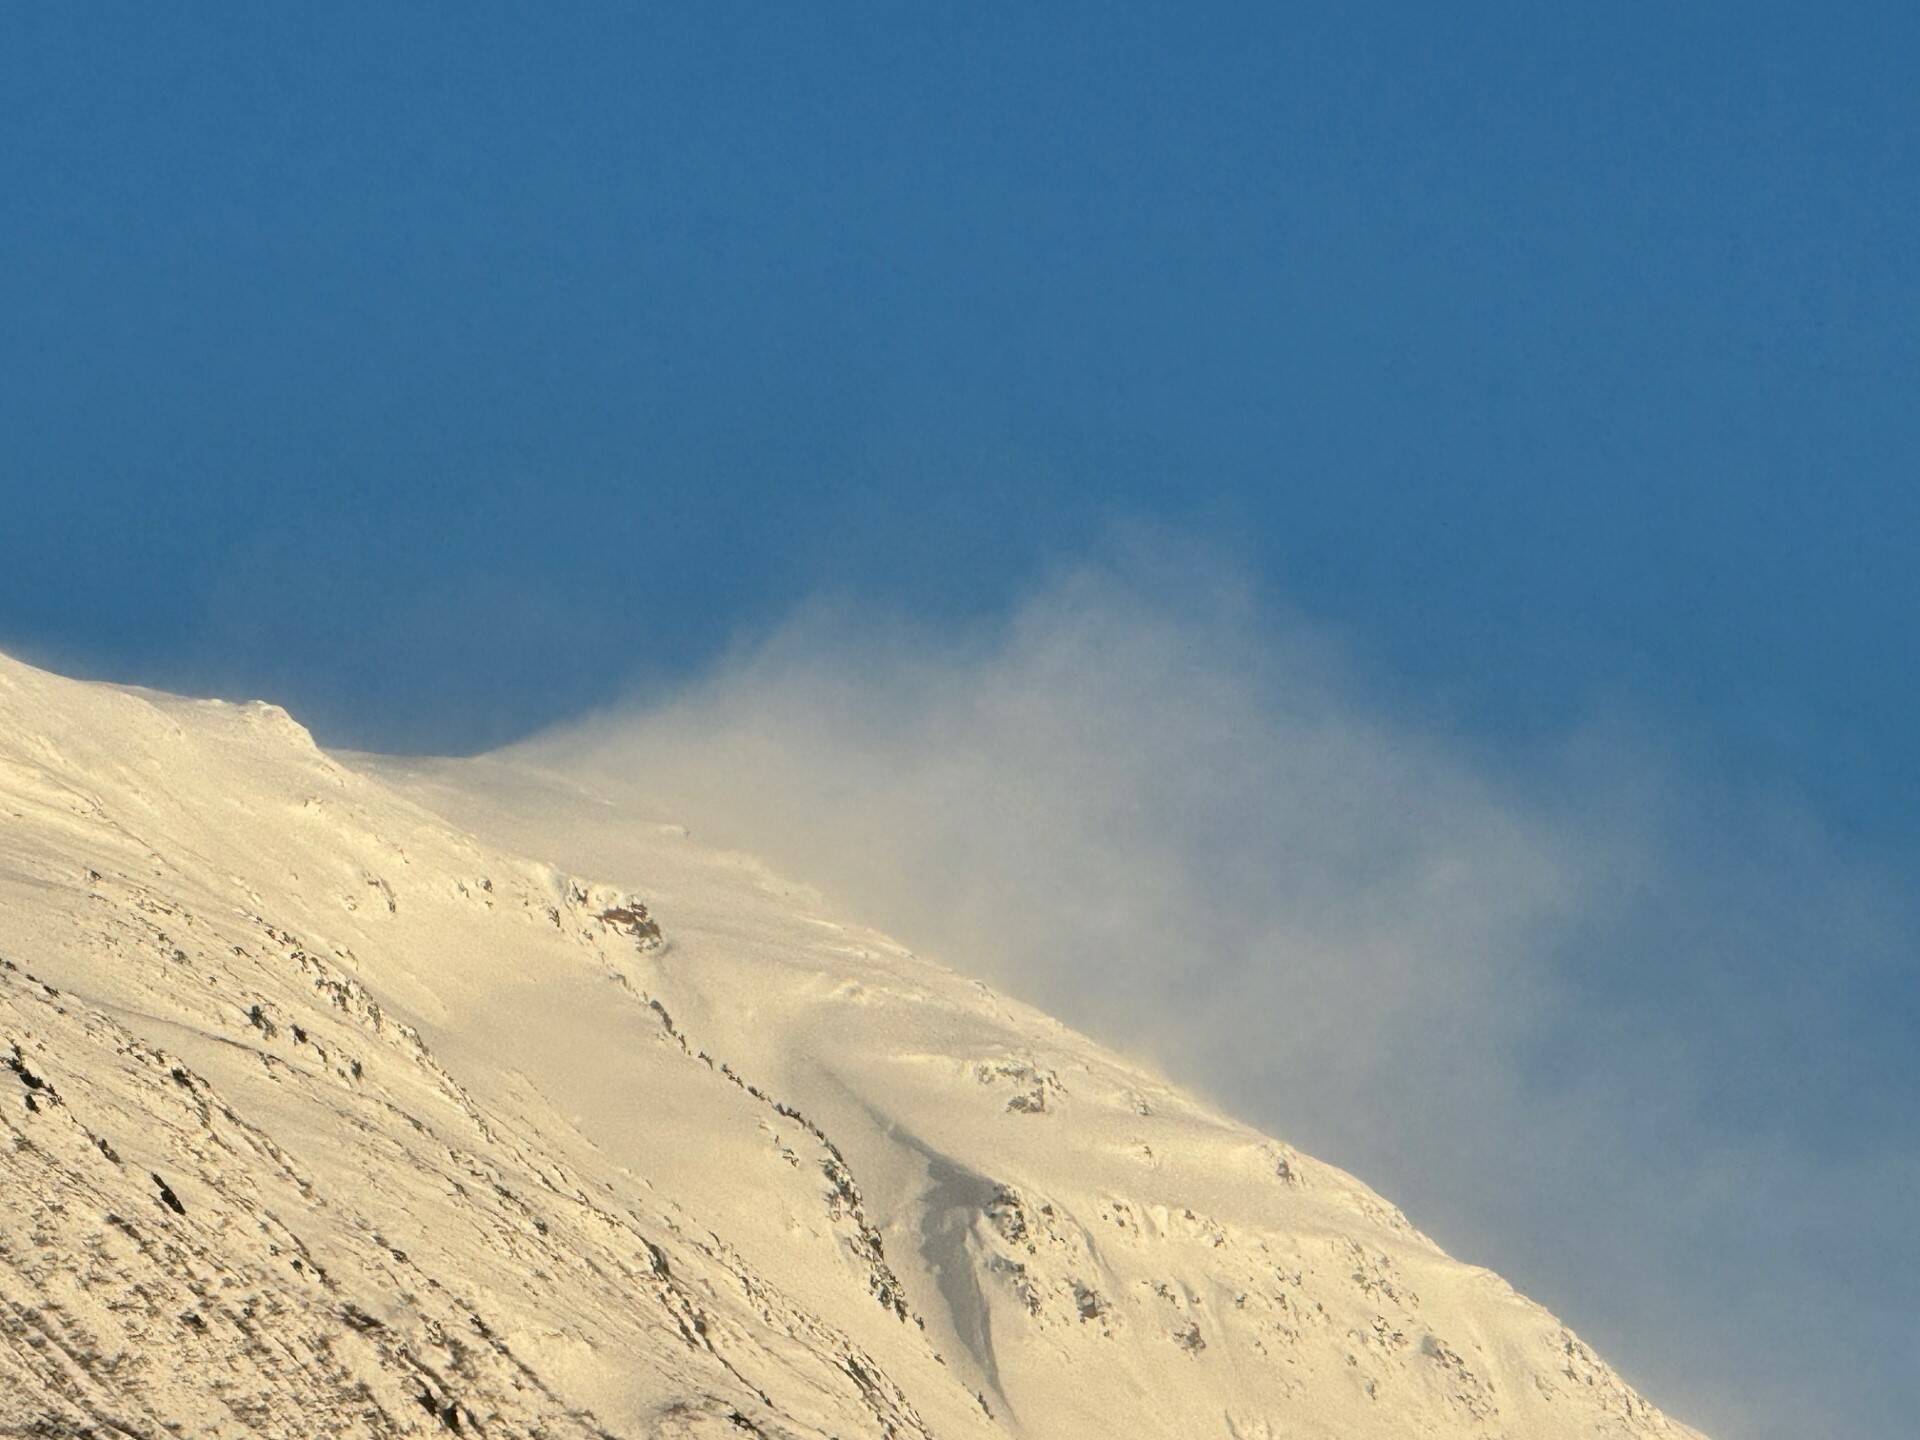 Mount Roberts “smoking” on Jan. 11 due to high winds. (Photo by Denise Carroll)